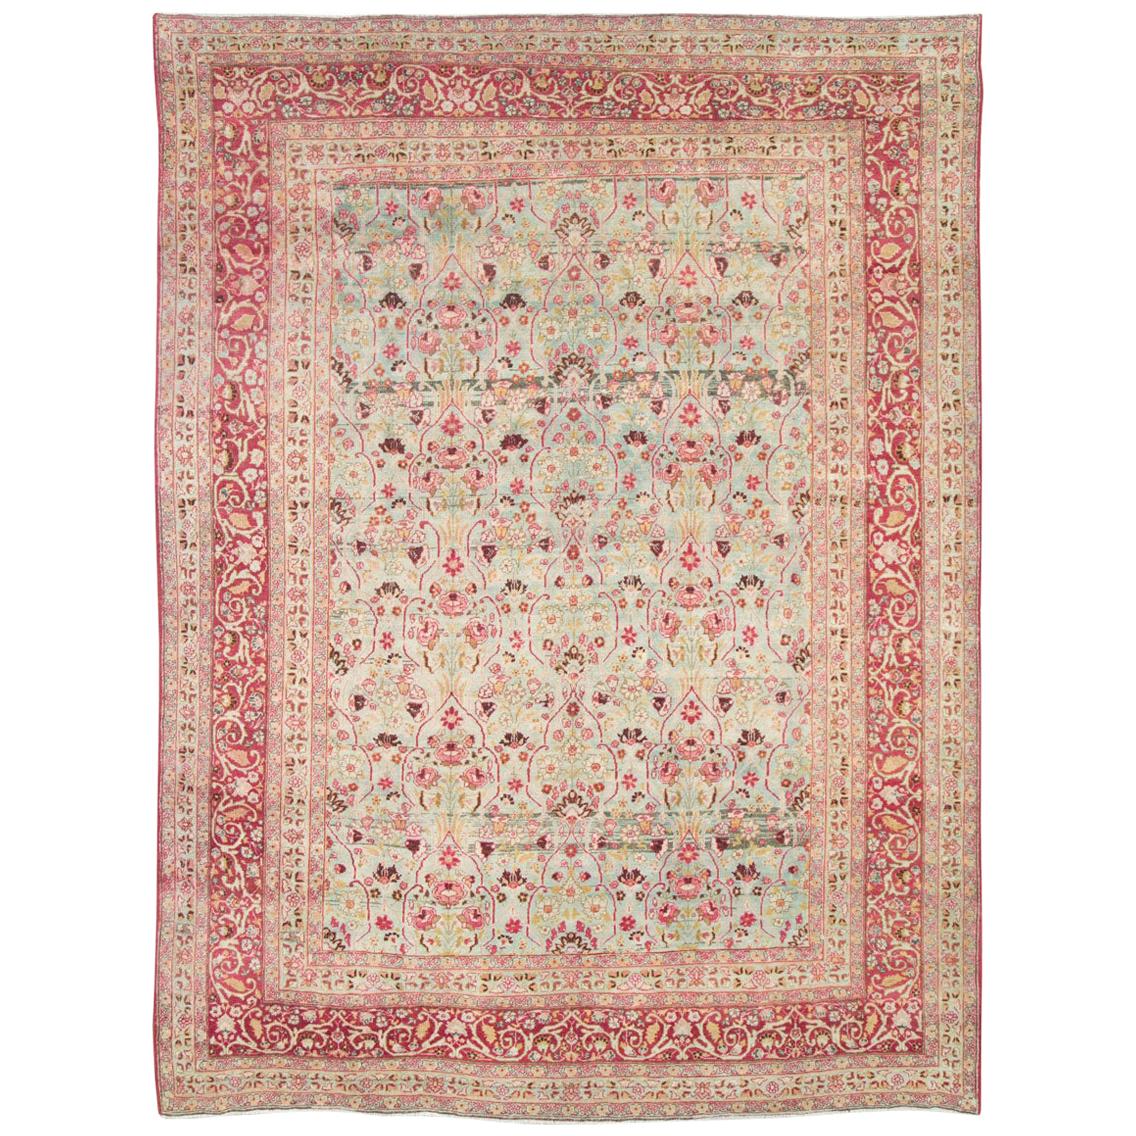 Early 20th Century Seafoam Green, Ruby Red and Pink Persian Room Size Rug